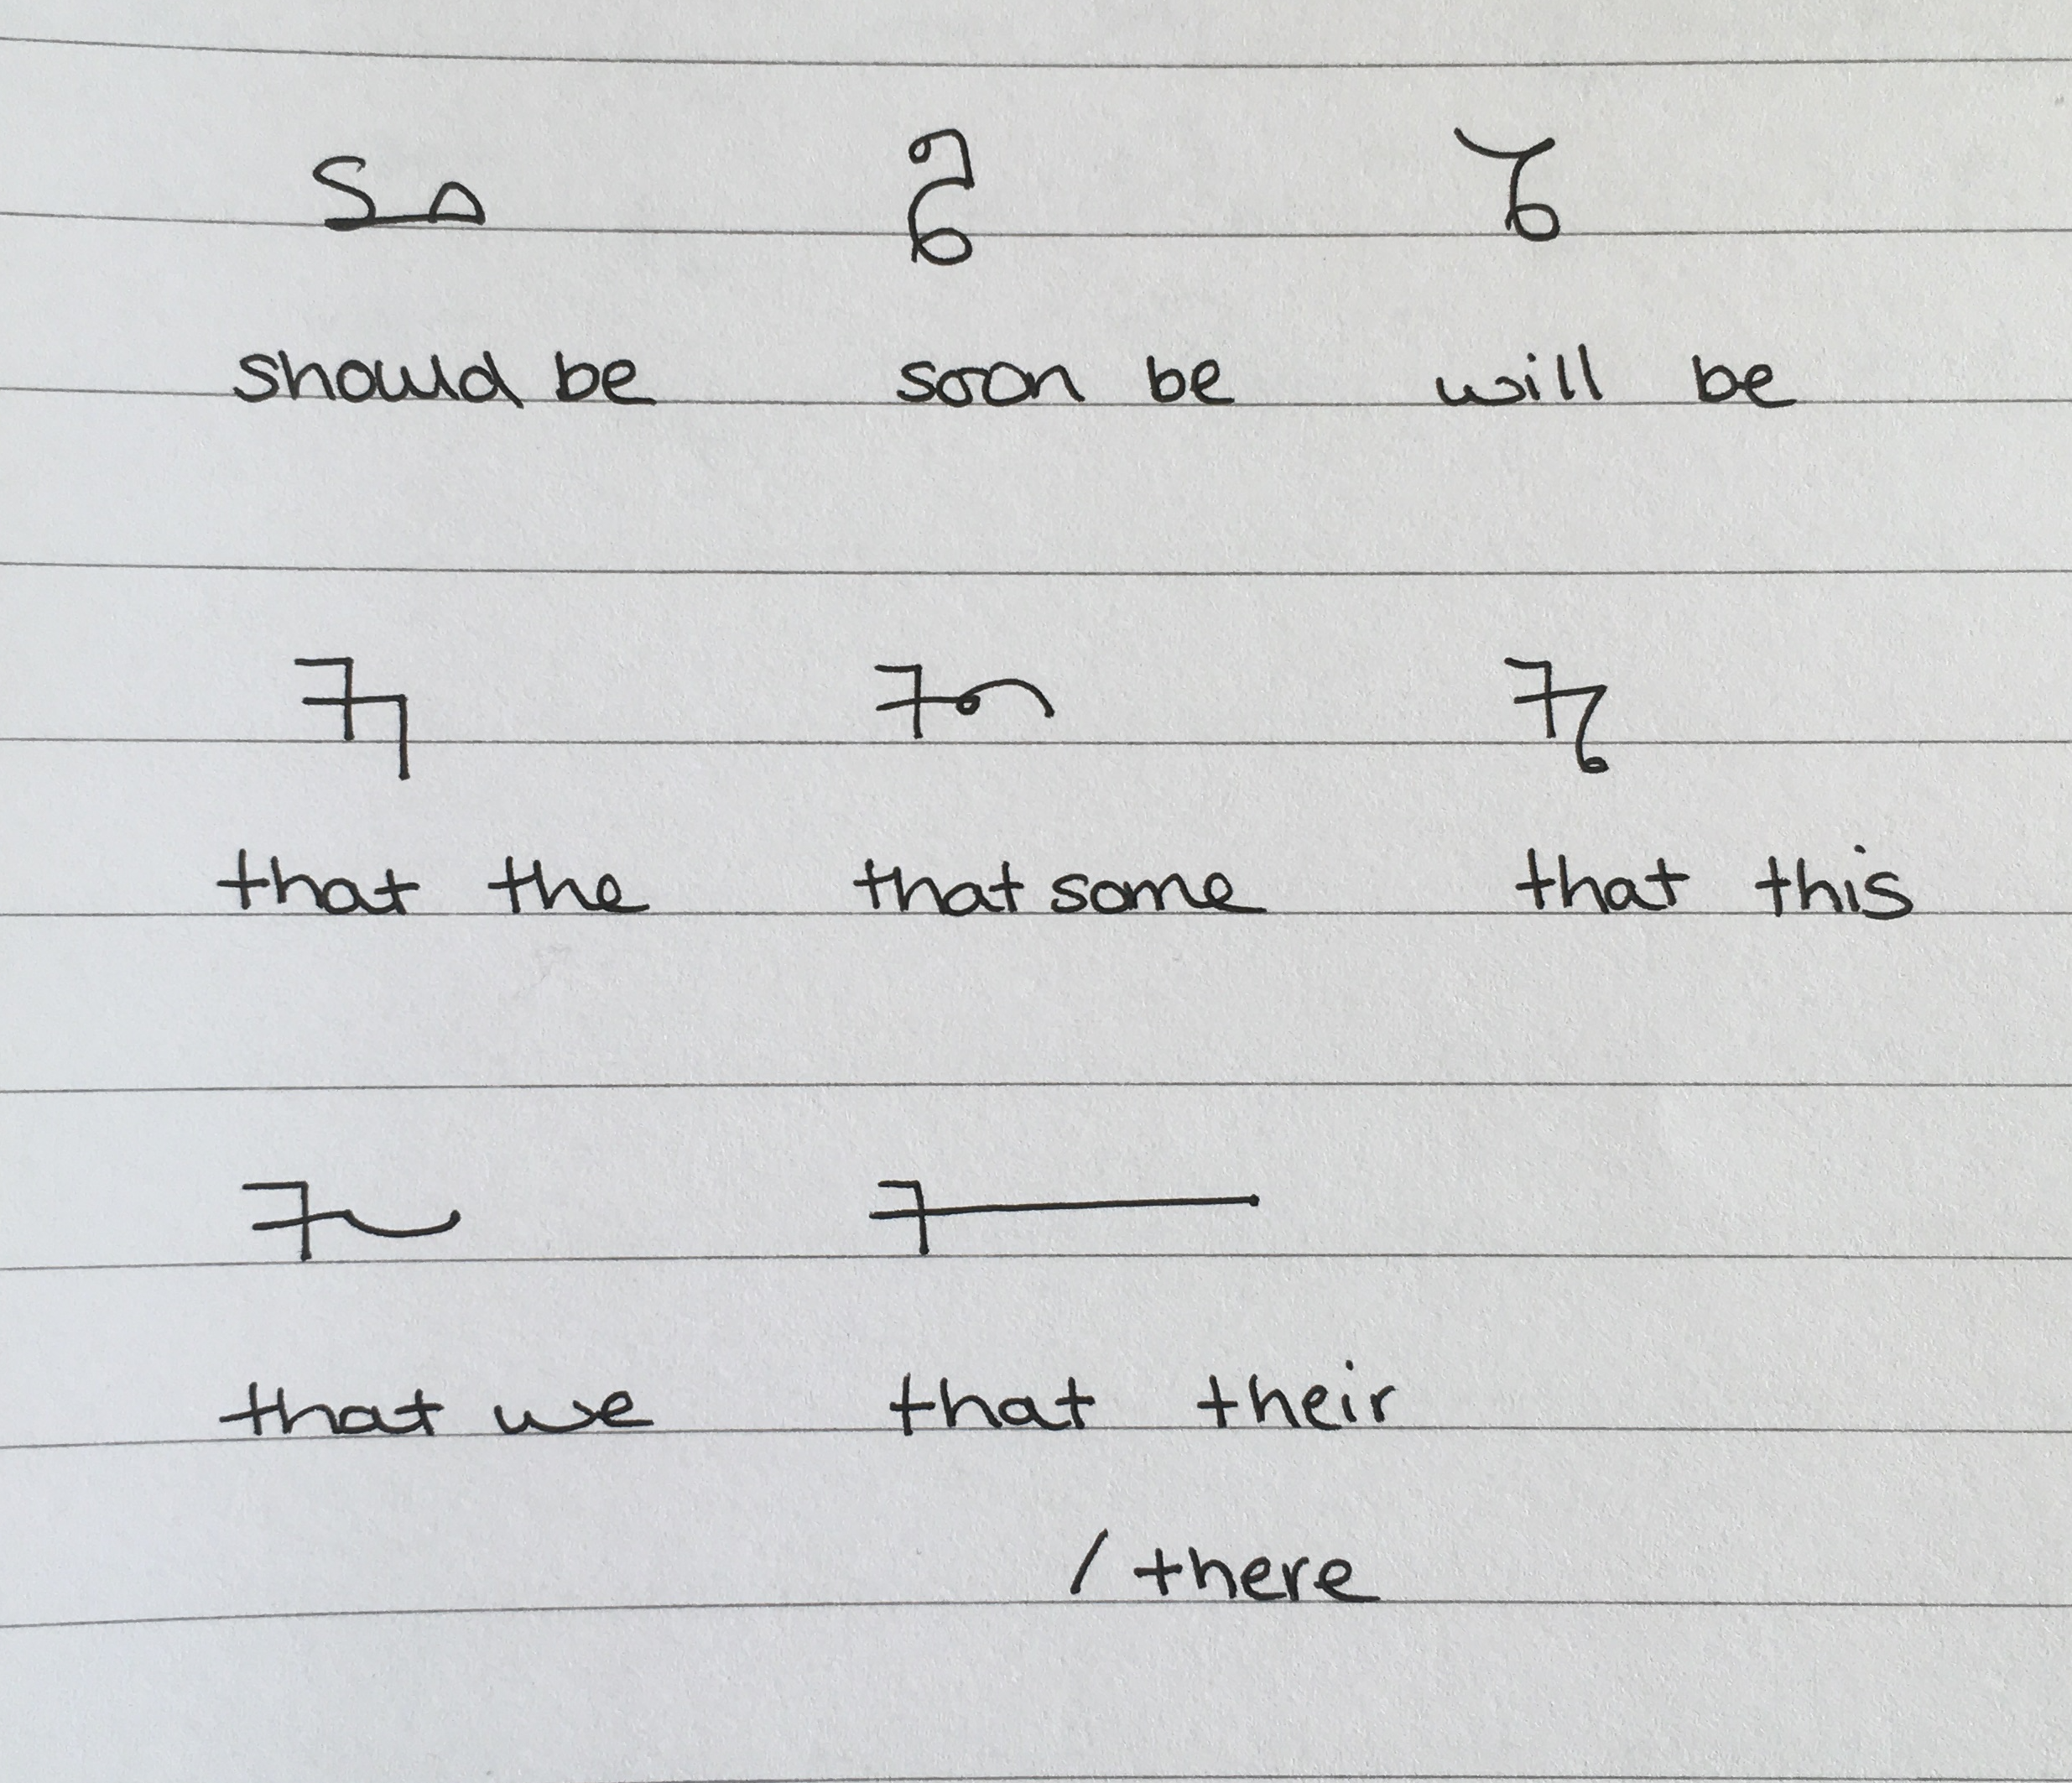 Teeline Shorthand Special Phrases written on a notepad